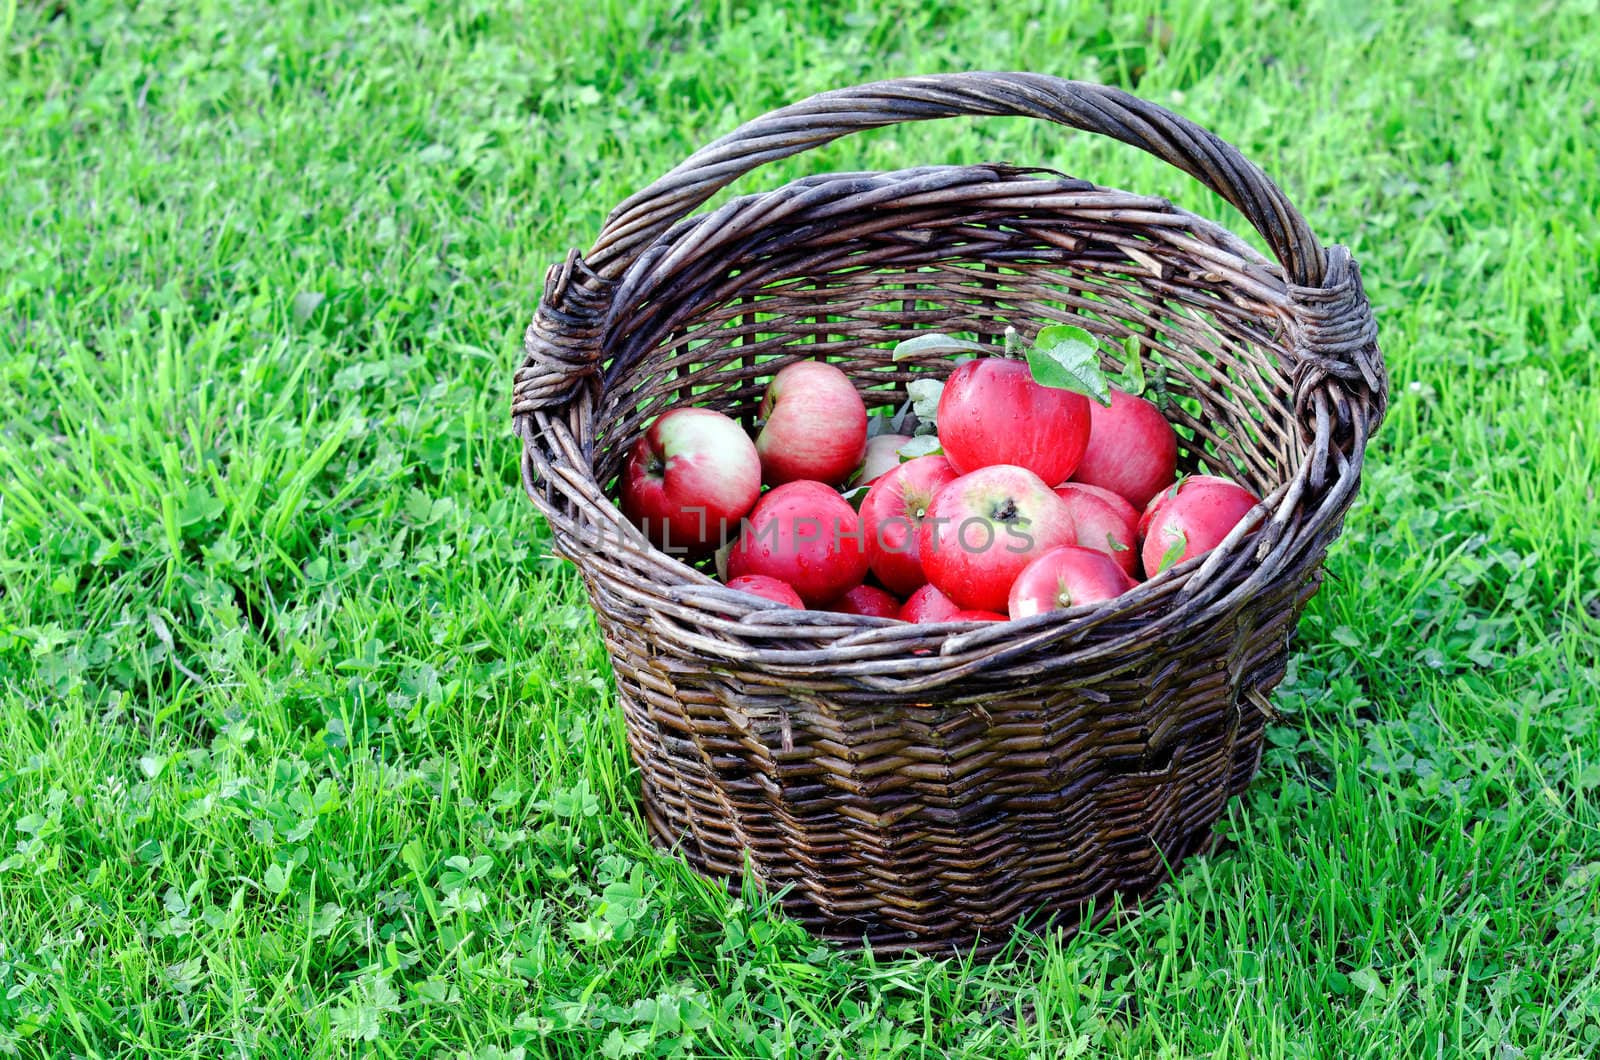 a crop of red apples